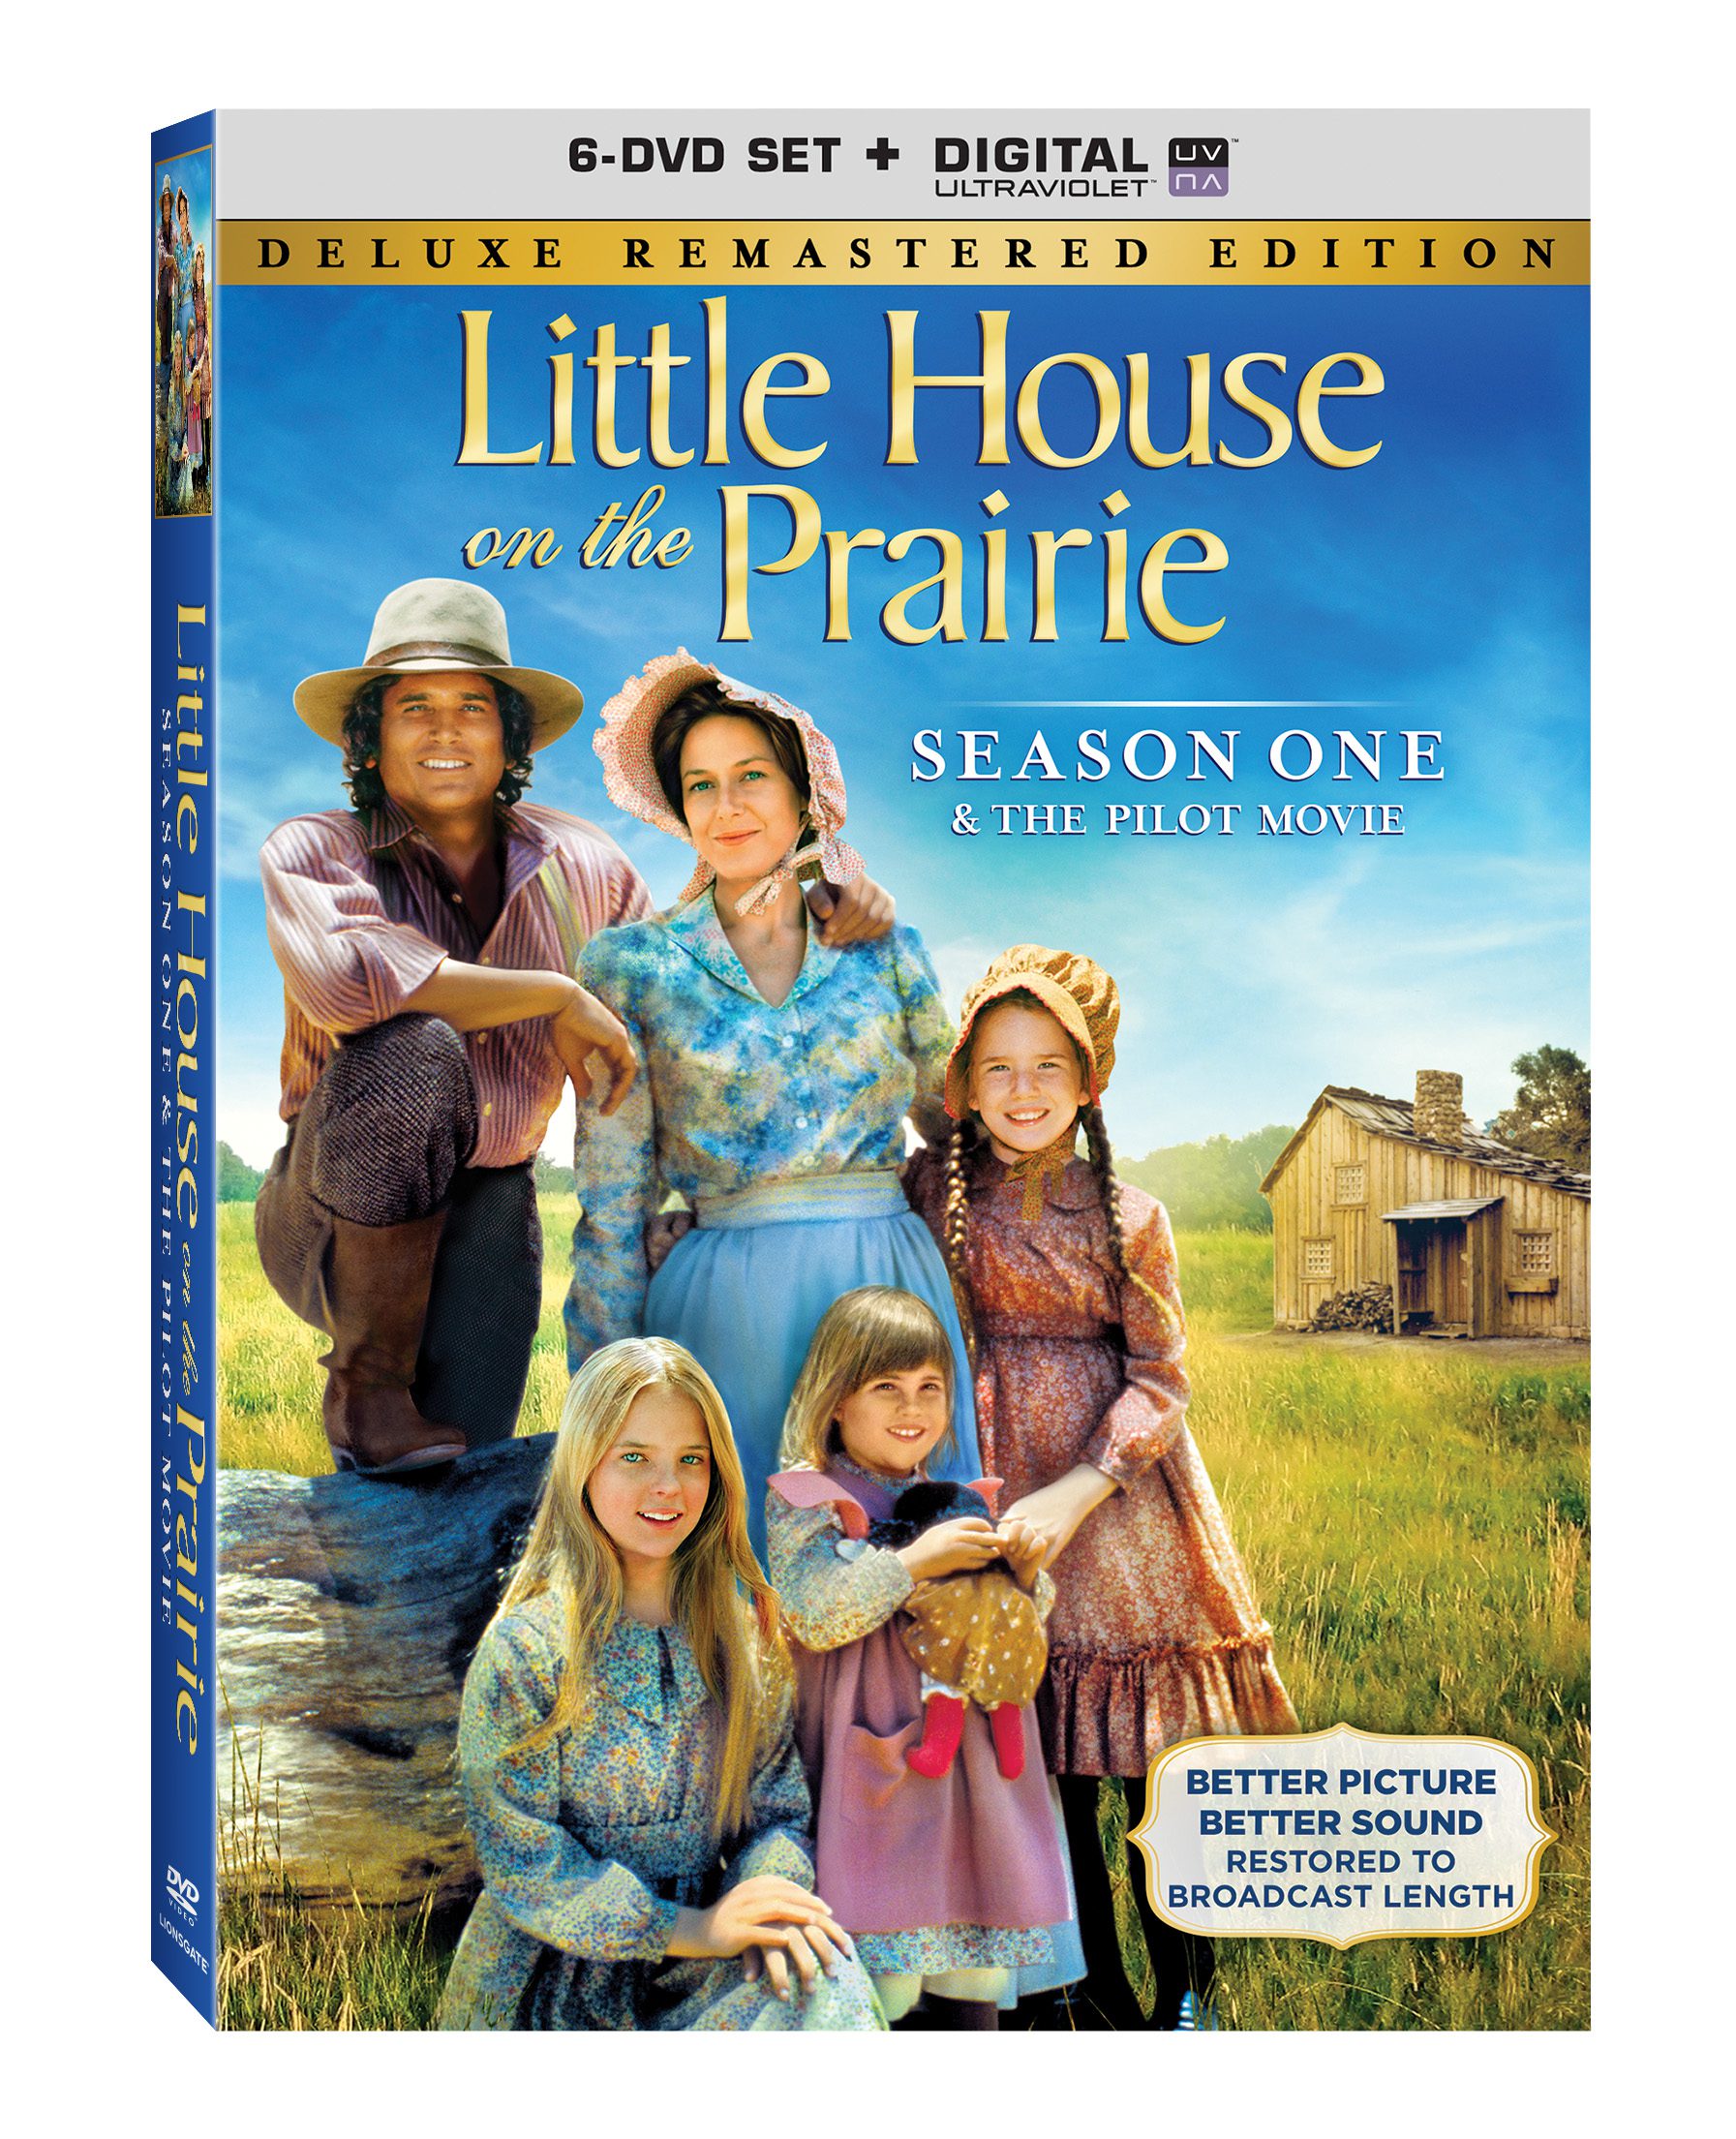 Little House On The Prairie – Season One Deluxe Remastered Edition DVD {Giveaway}